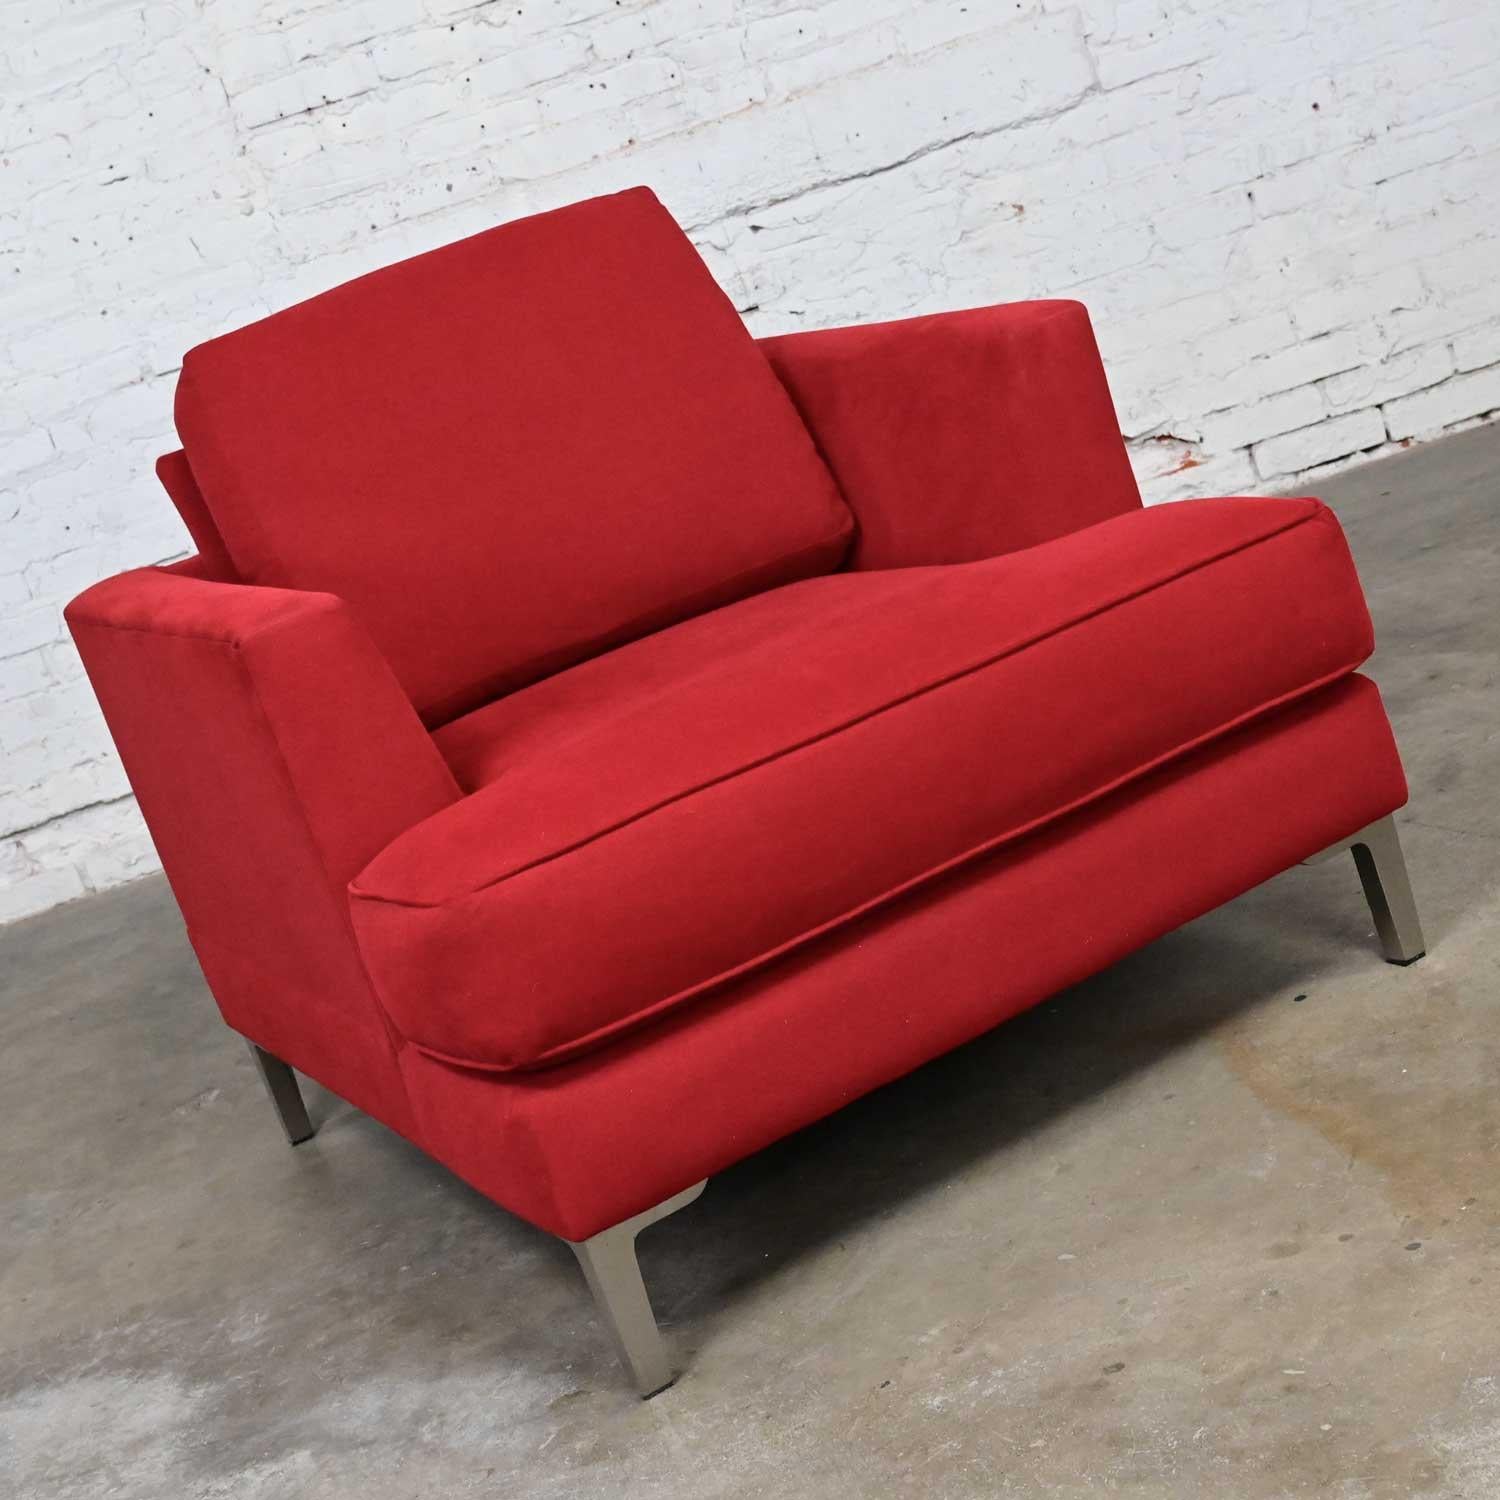 Modern Carter Club Chair Attr Zen Collection Bright Red with Polished Steel Legs In Good Condition For Sale In Topeka, KS